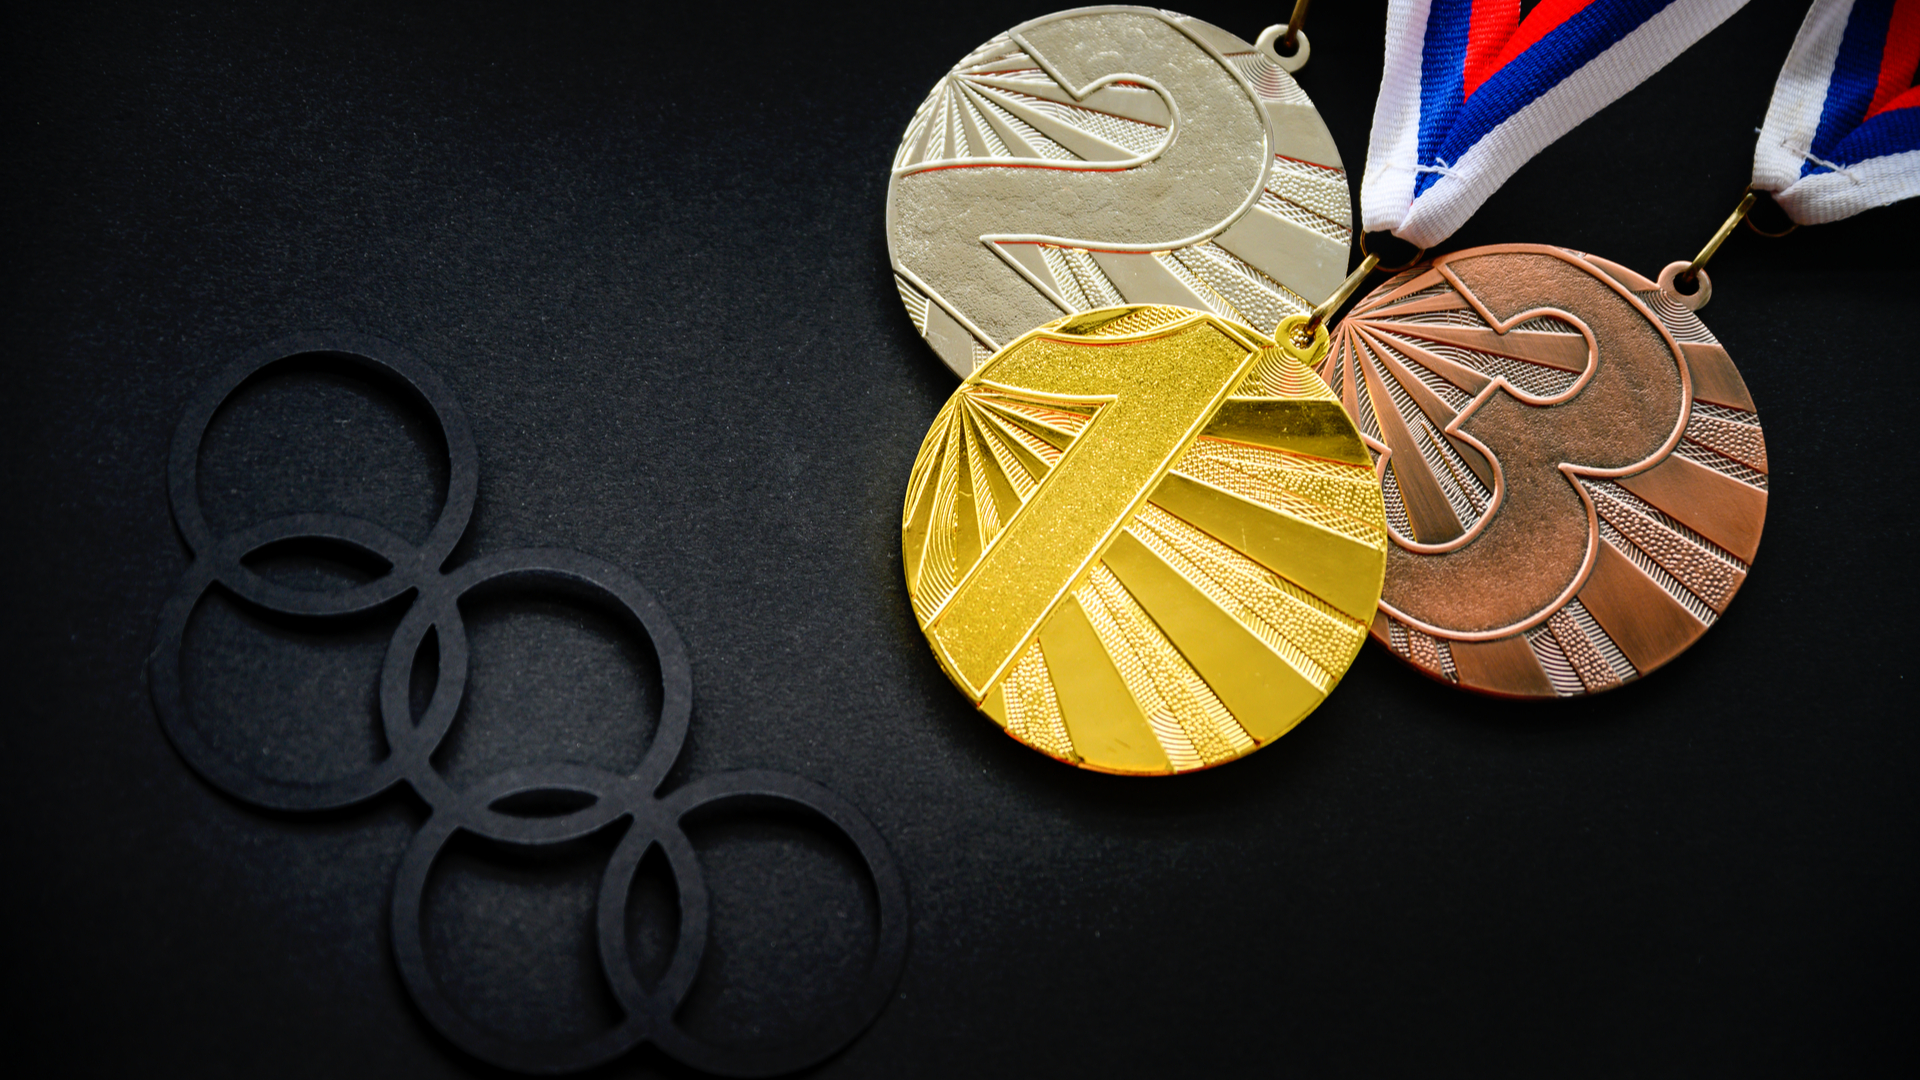 An image of the Olympic coins. Gold from Silver